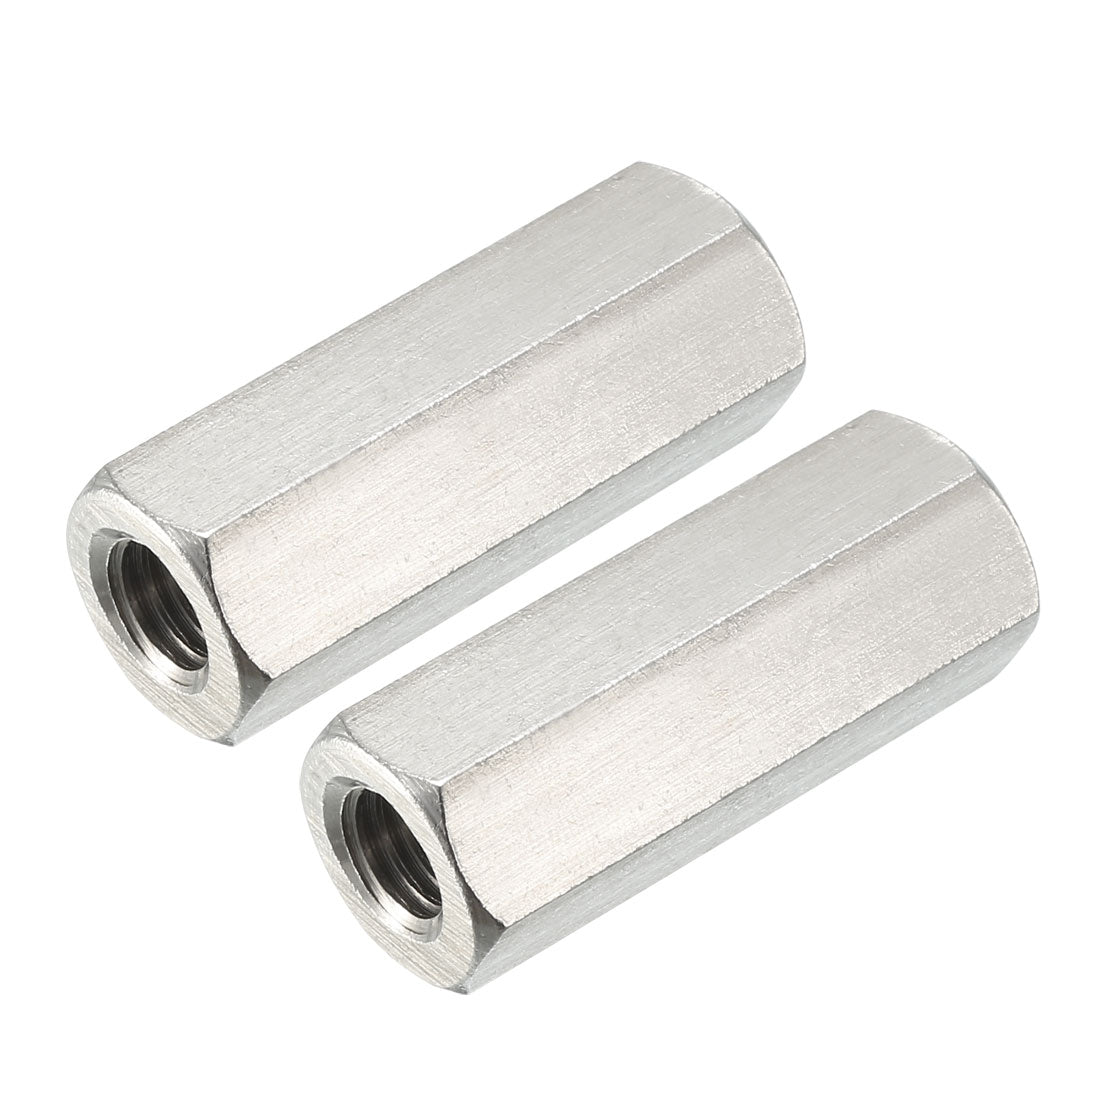 uxcell Uxcell M10 X 1.5-Pitch 45mm Length 304 Stainless Steel Metric Hex Coupling Nut, 2-Pack